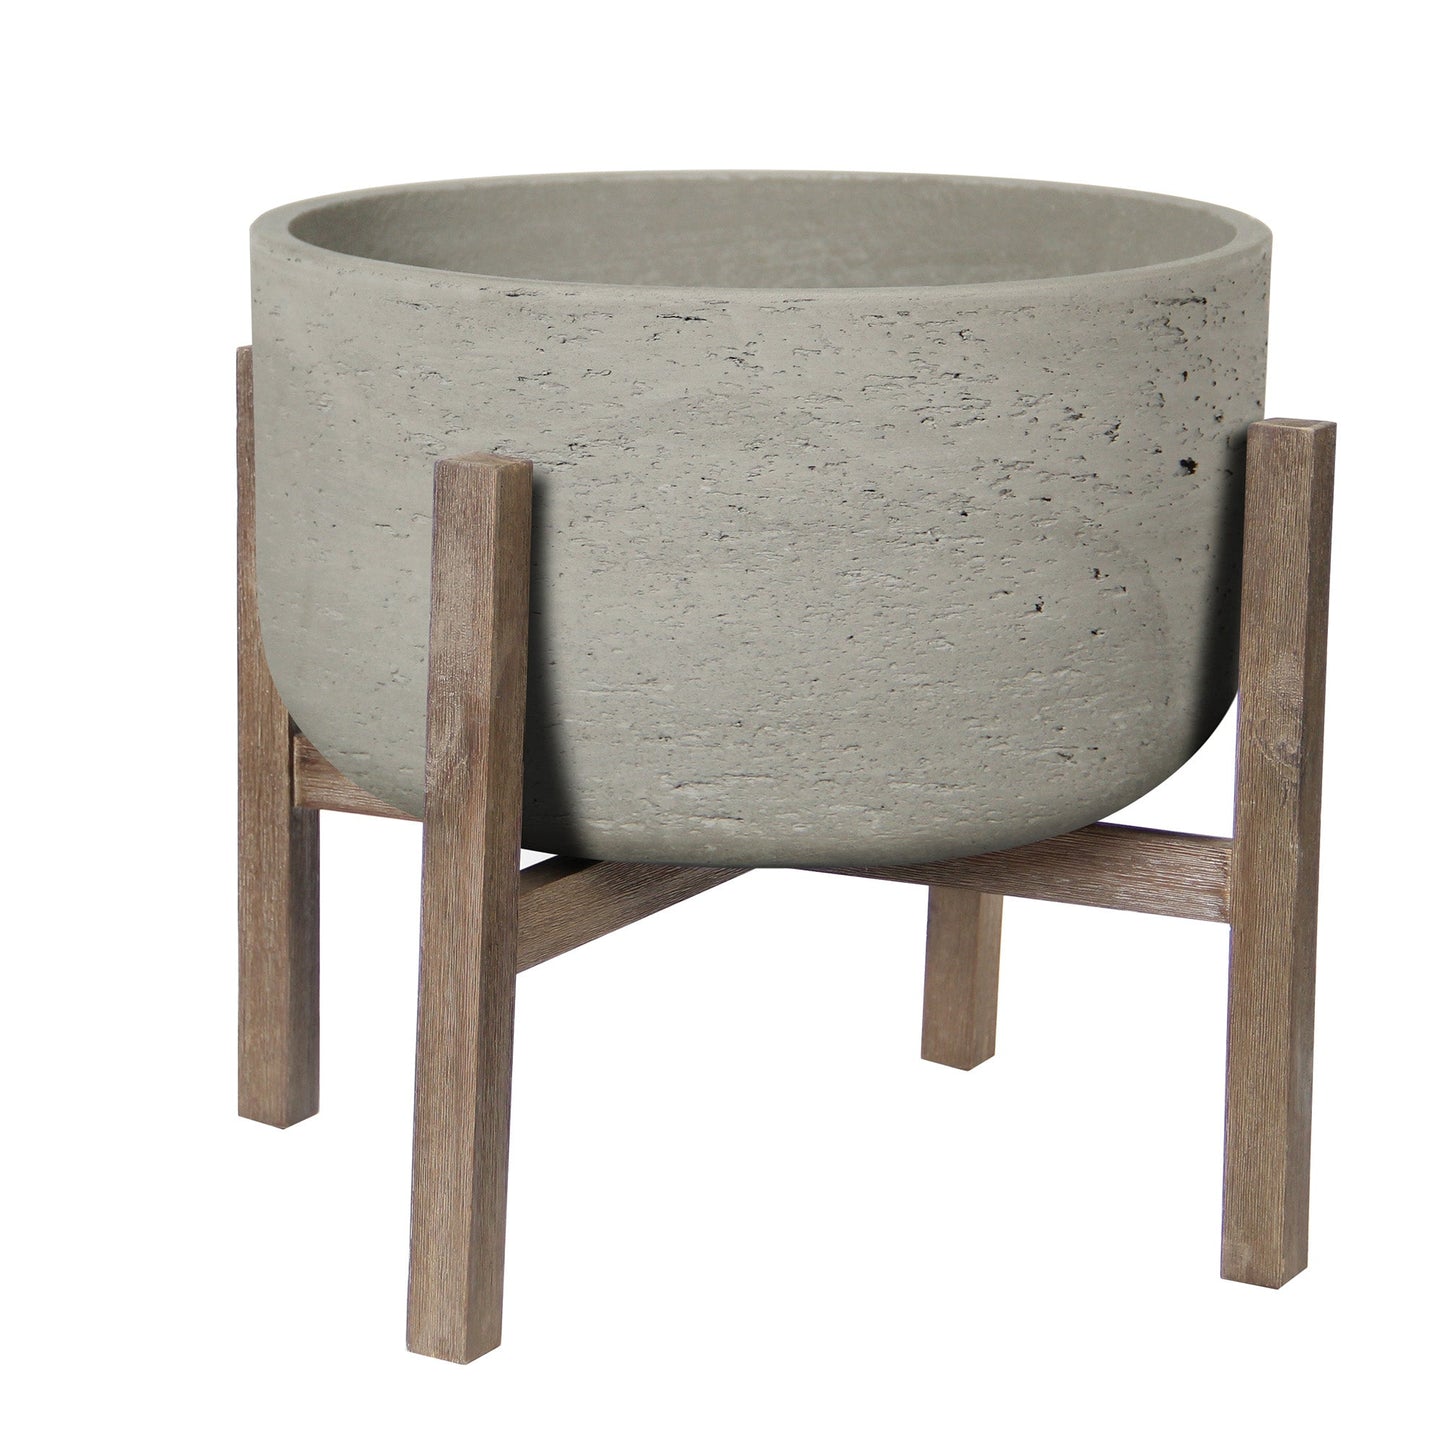 Altair Planter With Legs Giojardin Collection